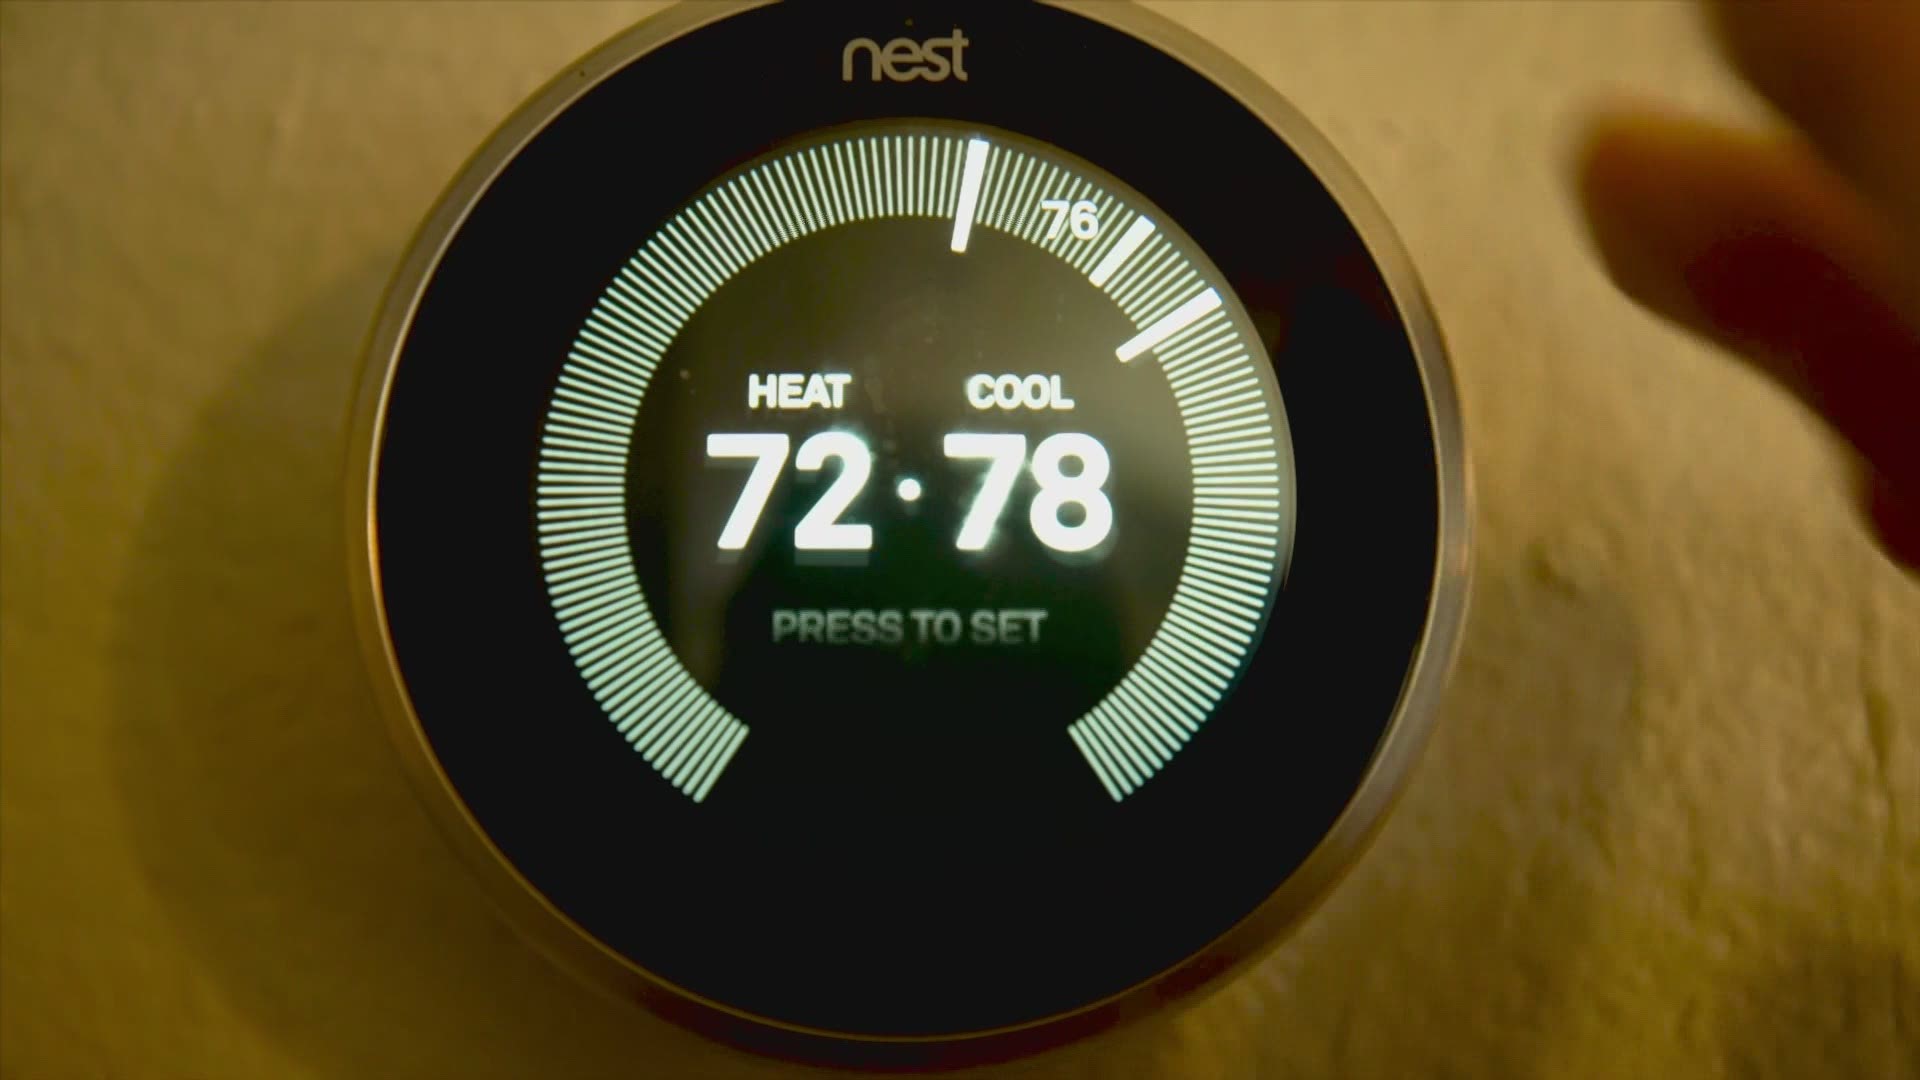 Most customers who turned up their thermostats in response to ERCOT’s conservation request did so out of the goodness of their hearts. Why not pay them?